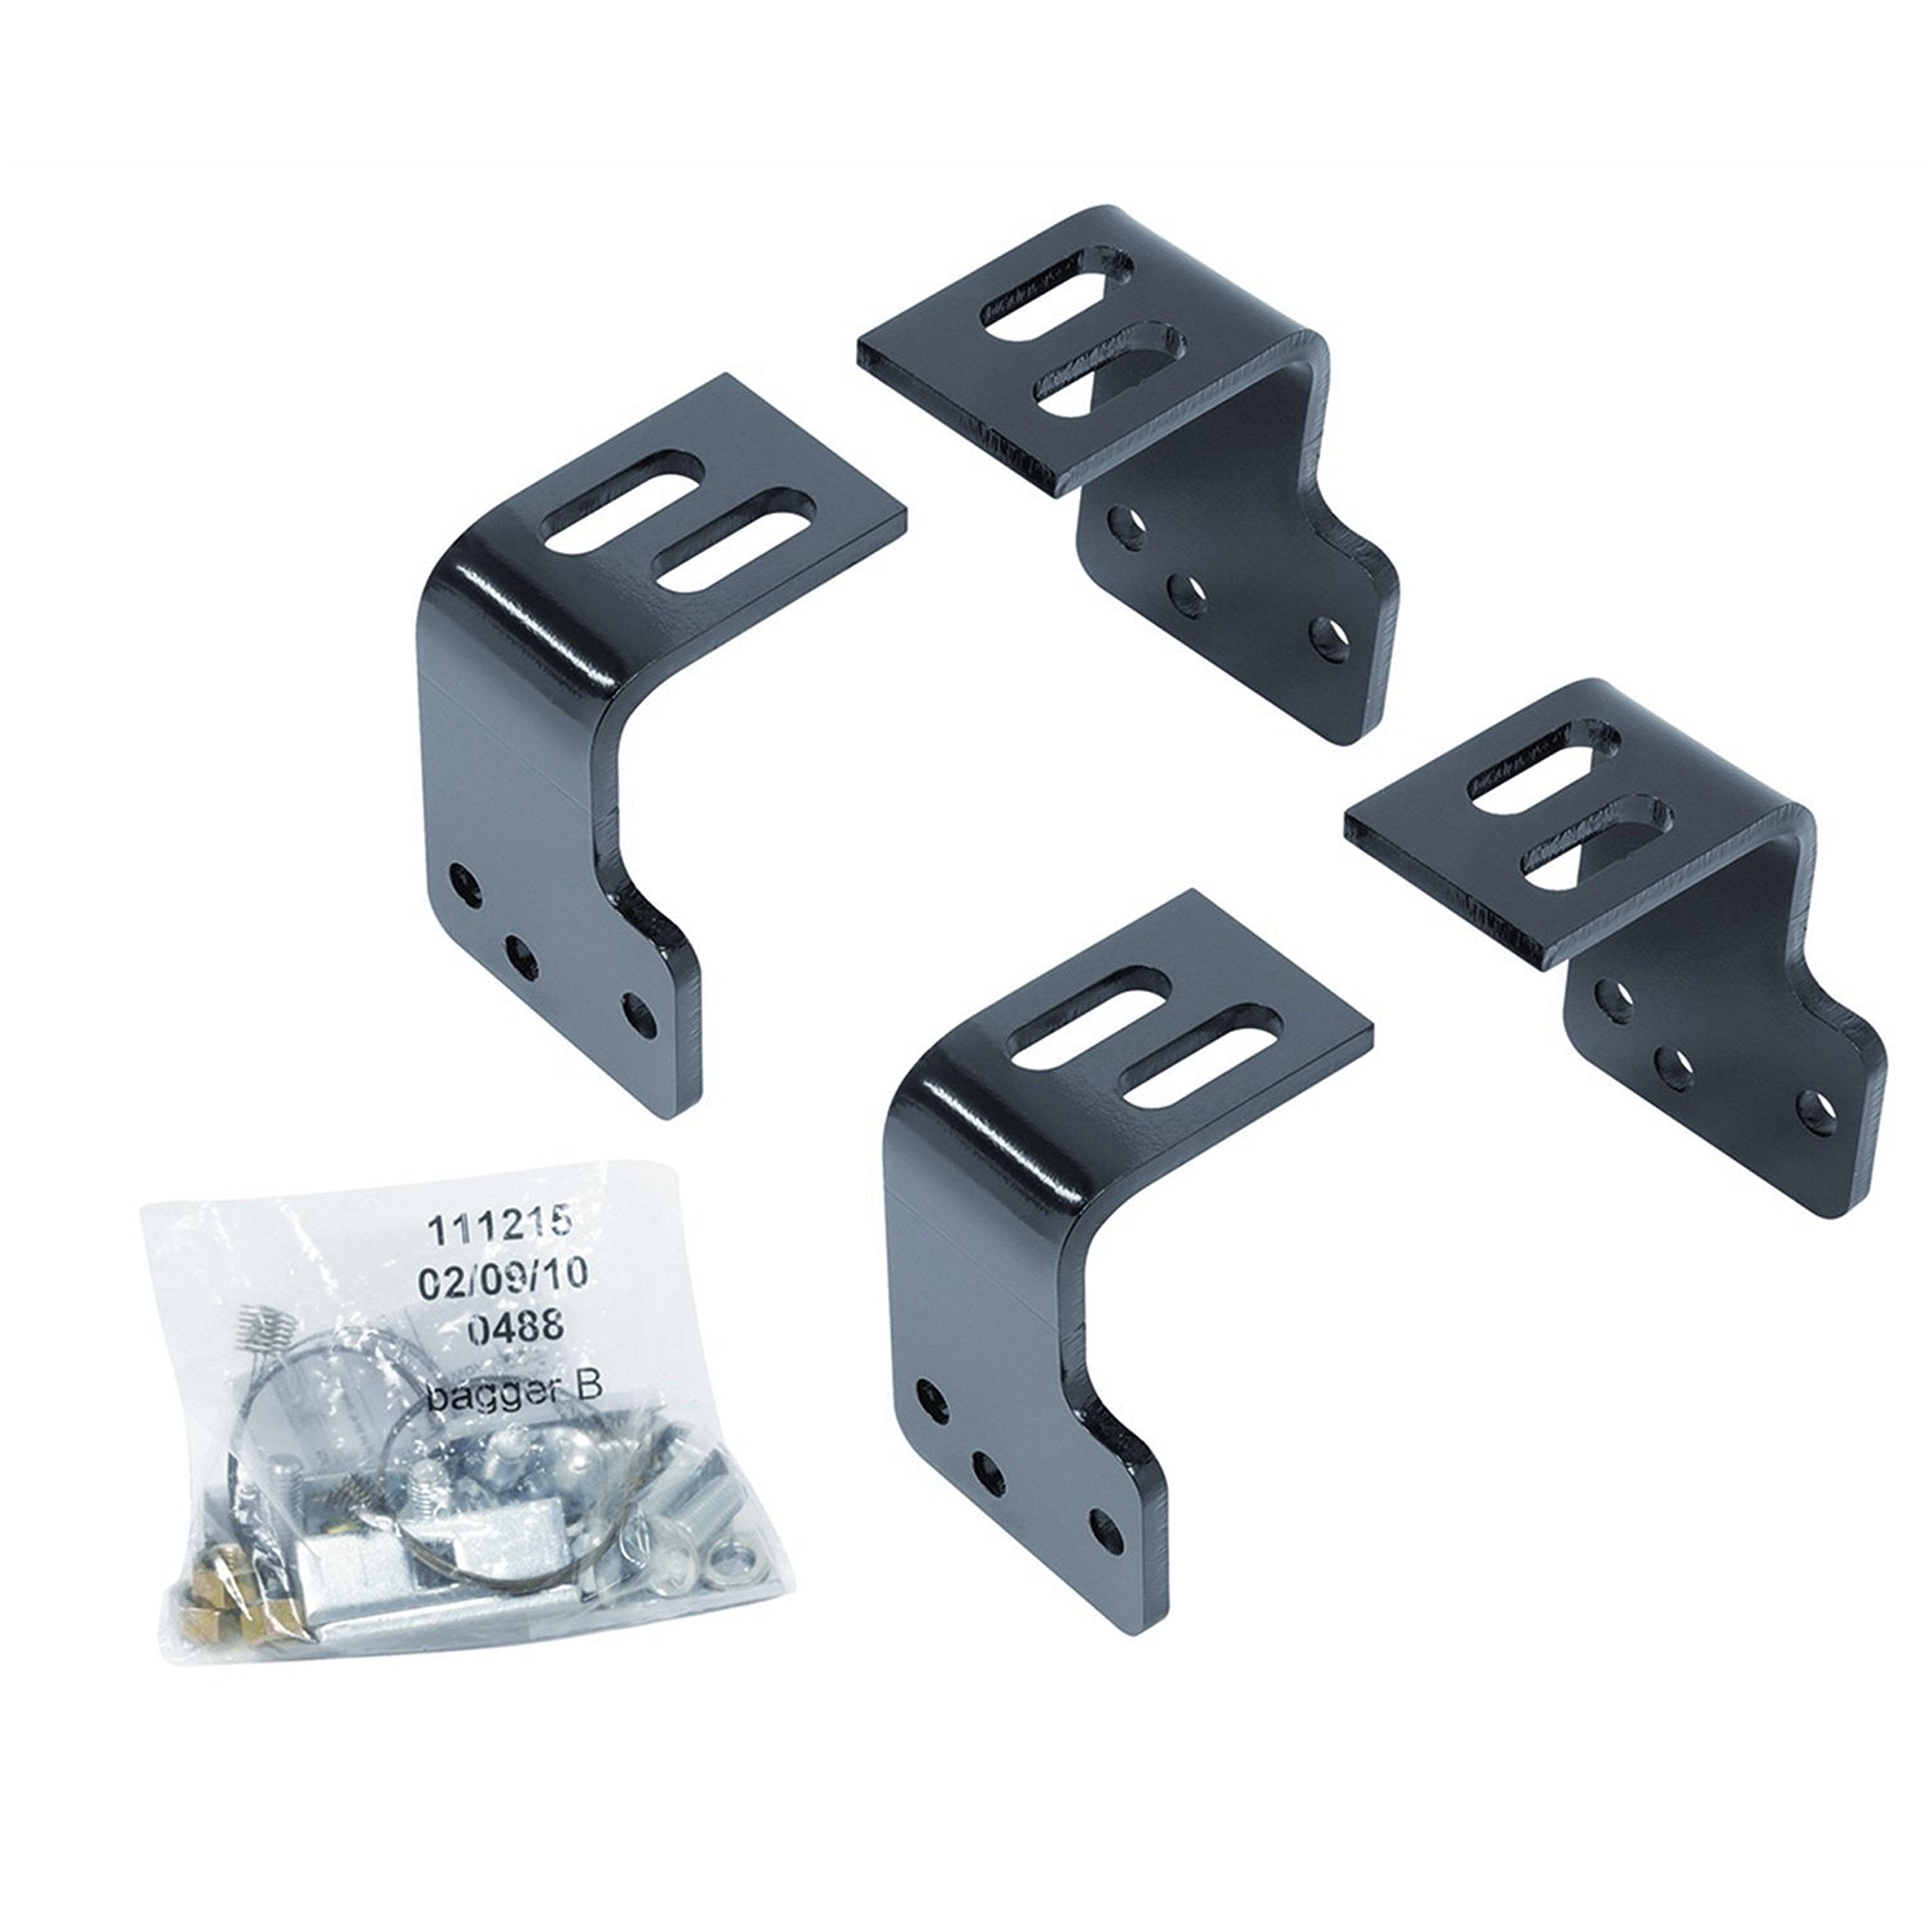 Reese 58426 Fifth Wheel Trailer Hitch Adapter Kit for #30035 and #30095 - Ford F-150 '04-'14